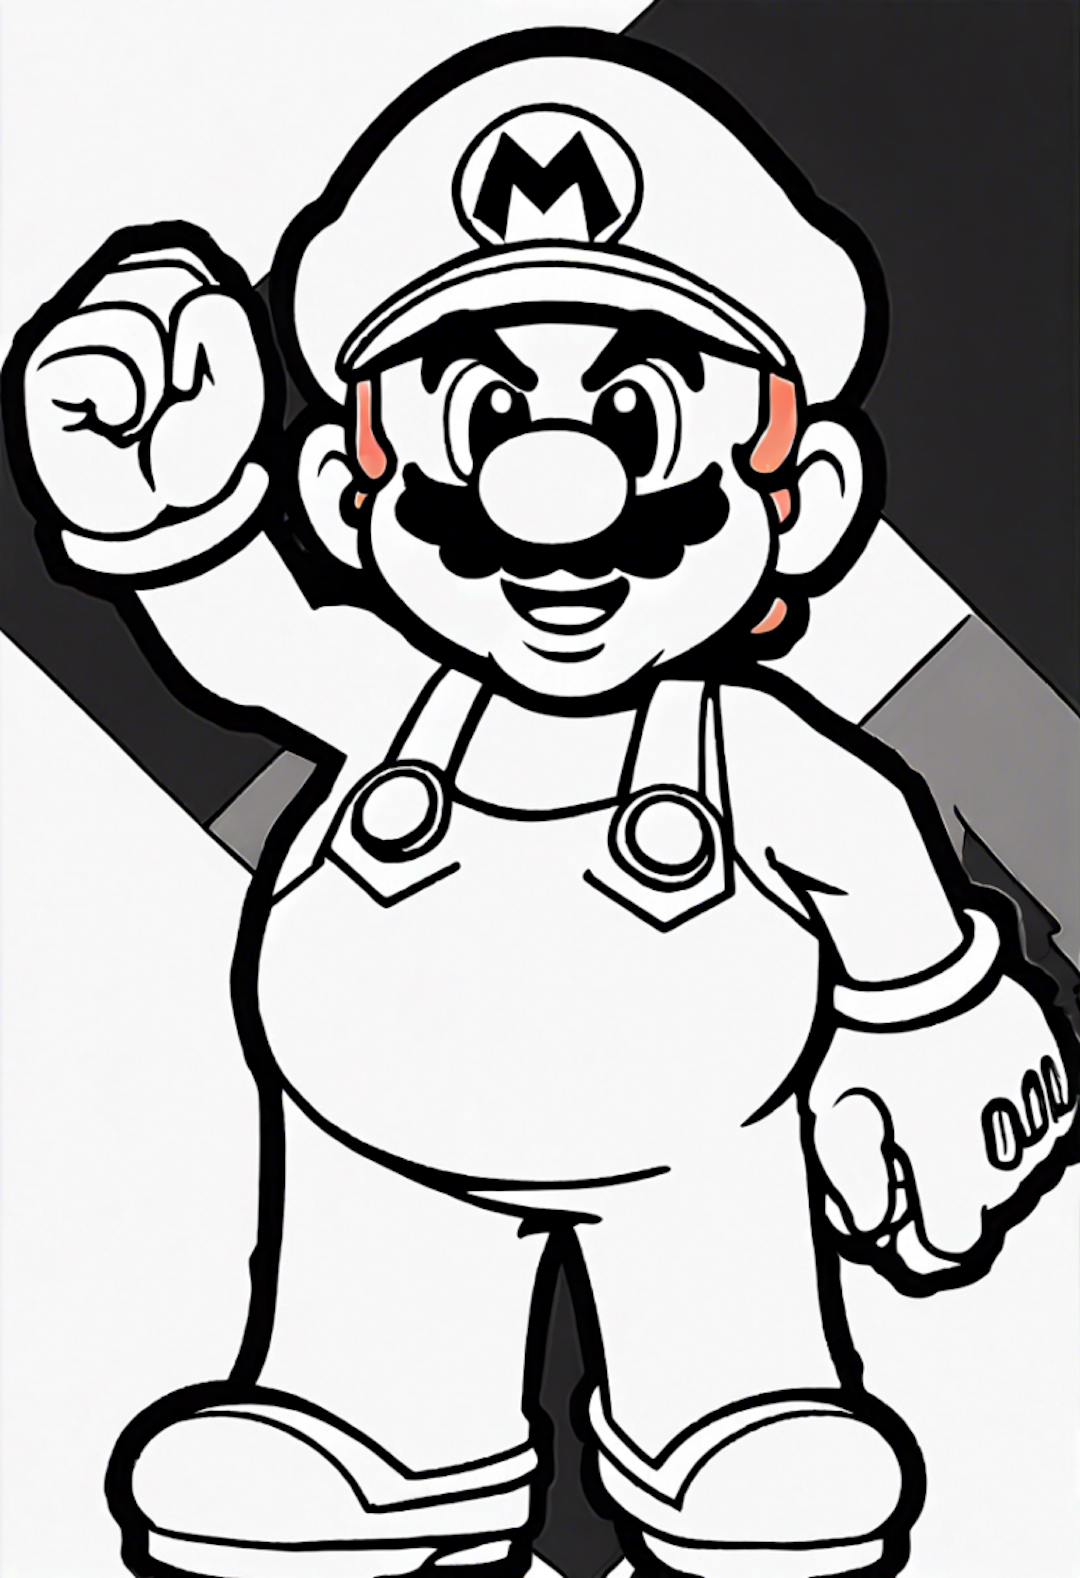 Mario in Action Coloring Page coloring pages